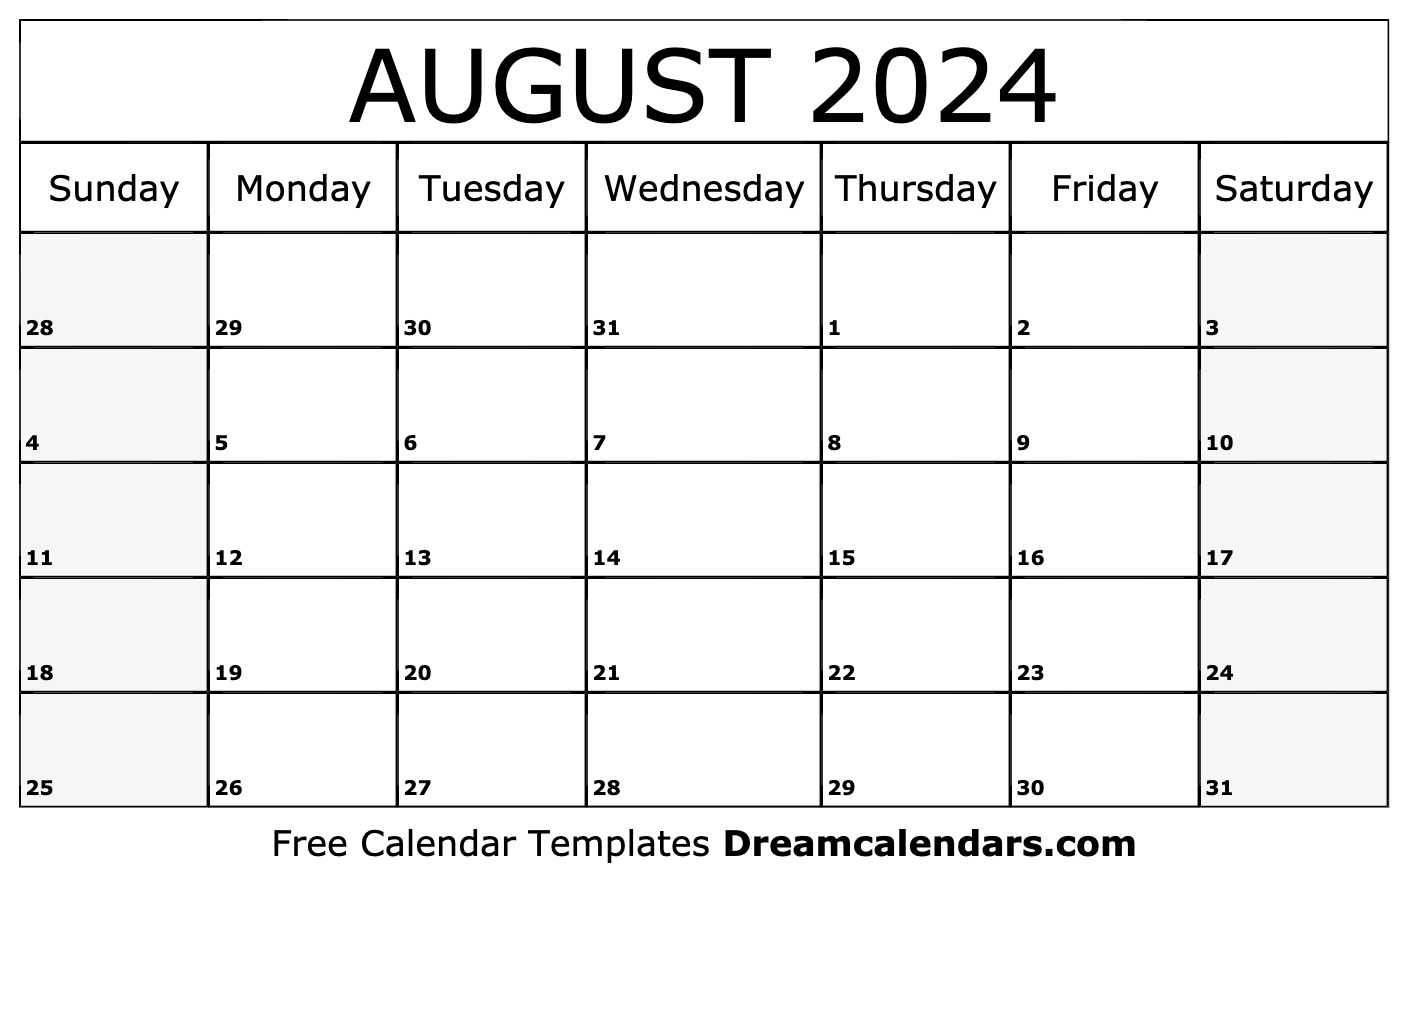 August 2024 Calendar | Free Blank Printable With Holidays for Free Printable Monthly Calendar August 2024